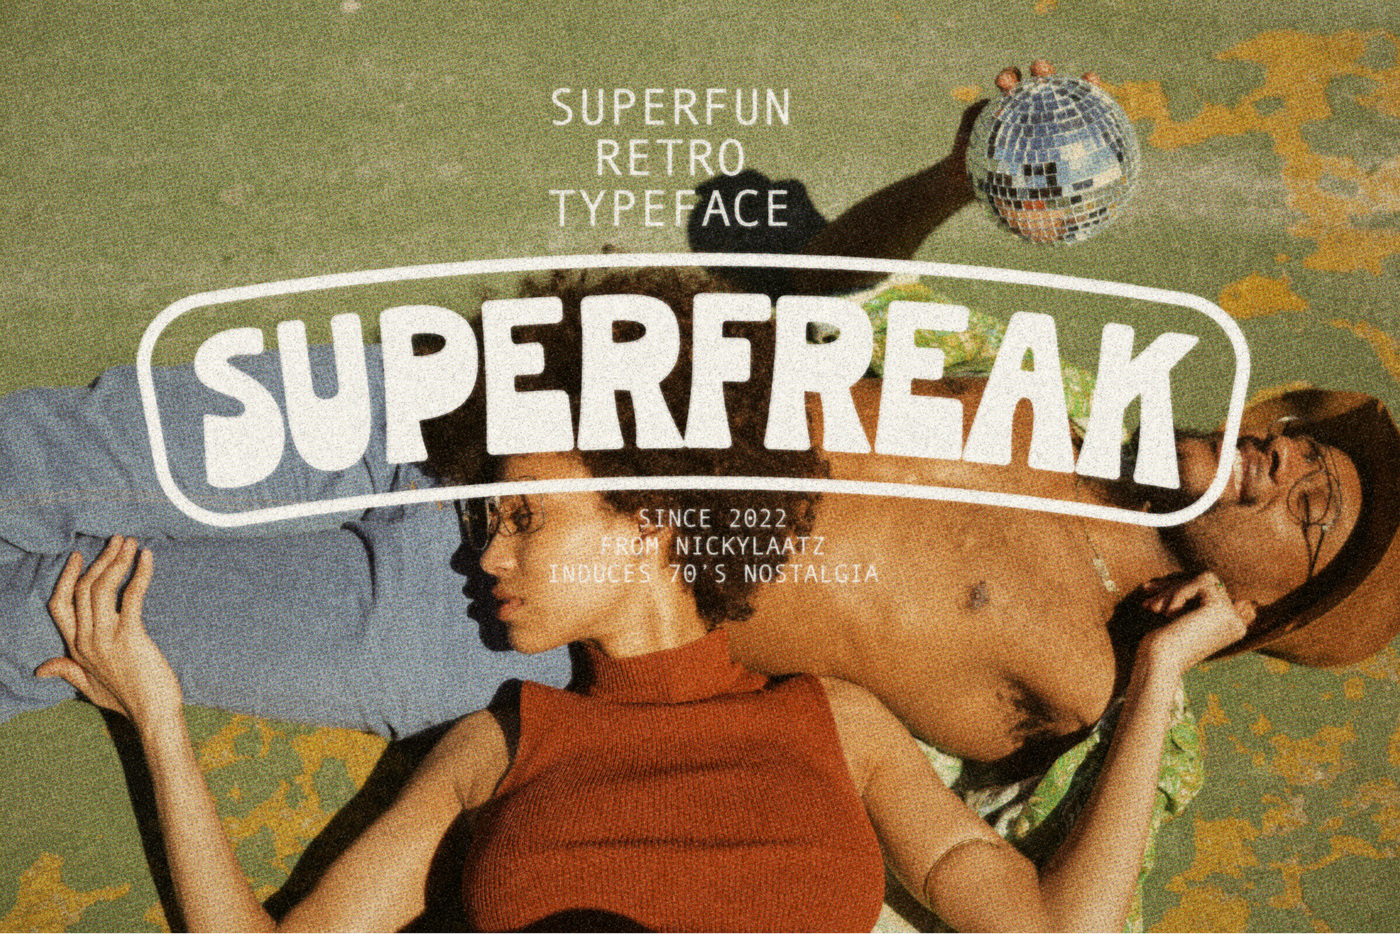 Superfreak Font main product image by Nicky Laatz